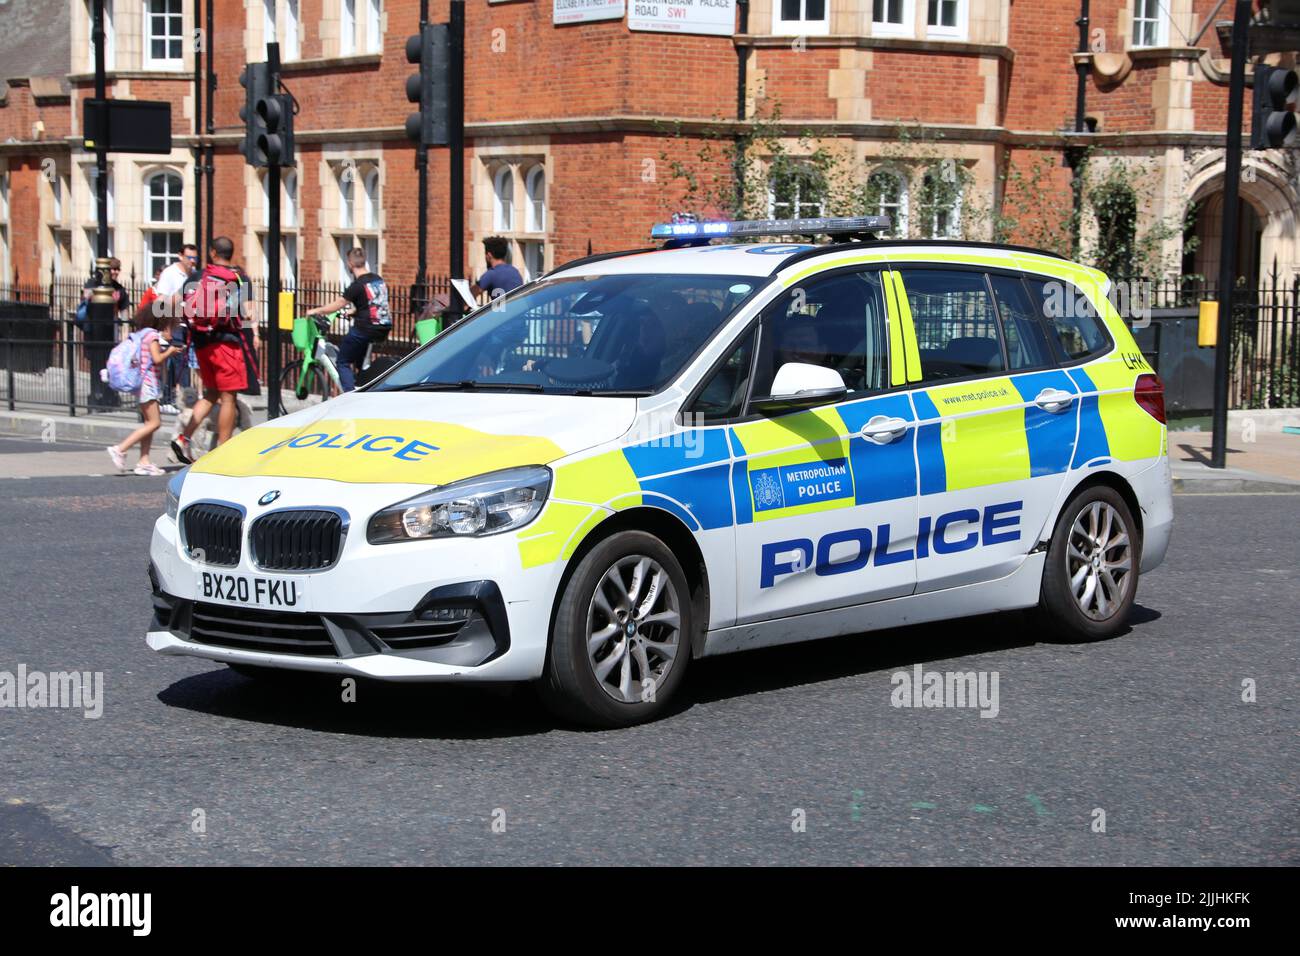 A BMW POLICE CAR OF METROPOLITAN POLICE ON A 999 EMERGENCY CALL WITH BLUE LIGHTS FLASHING Stock Photo